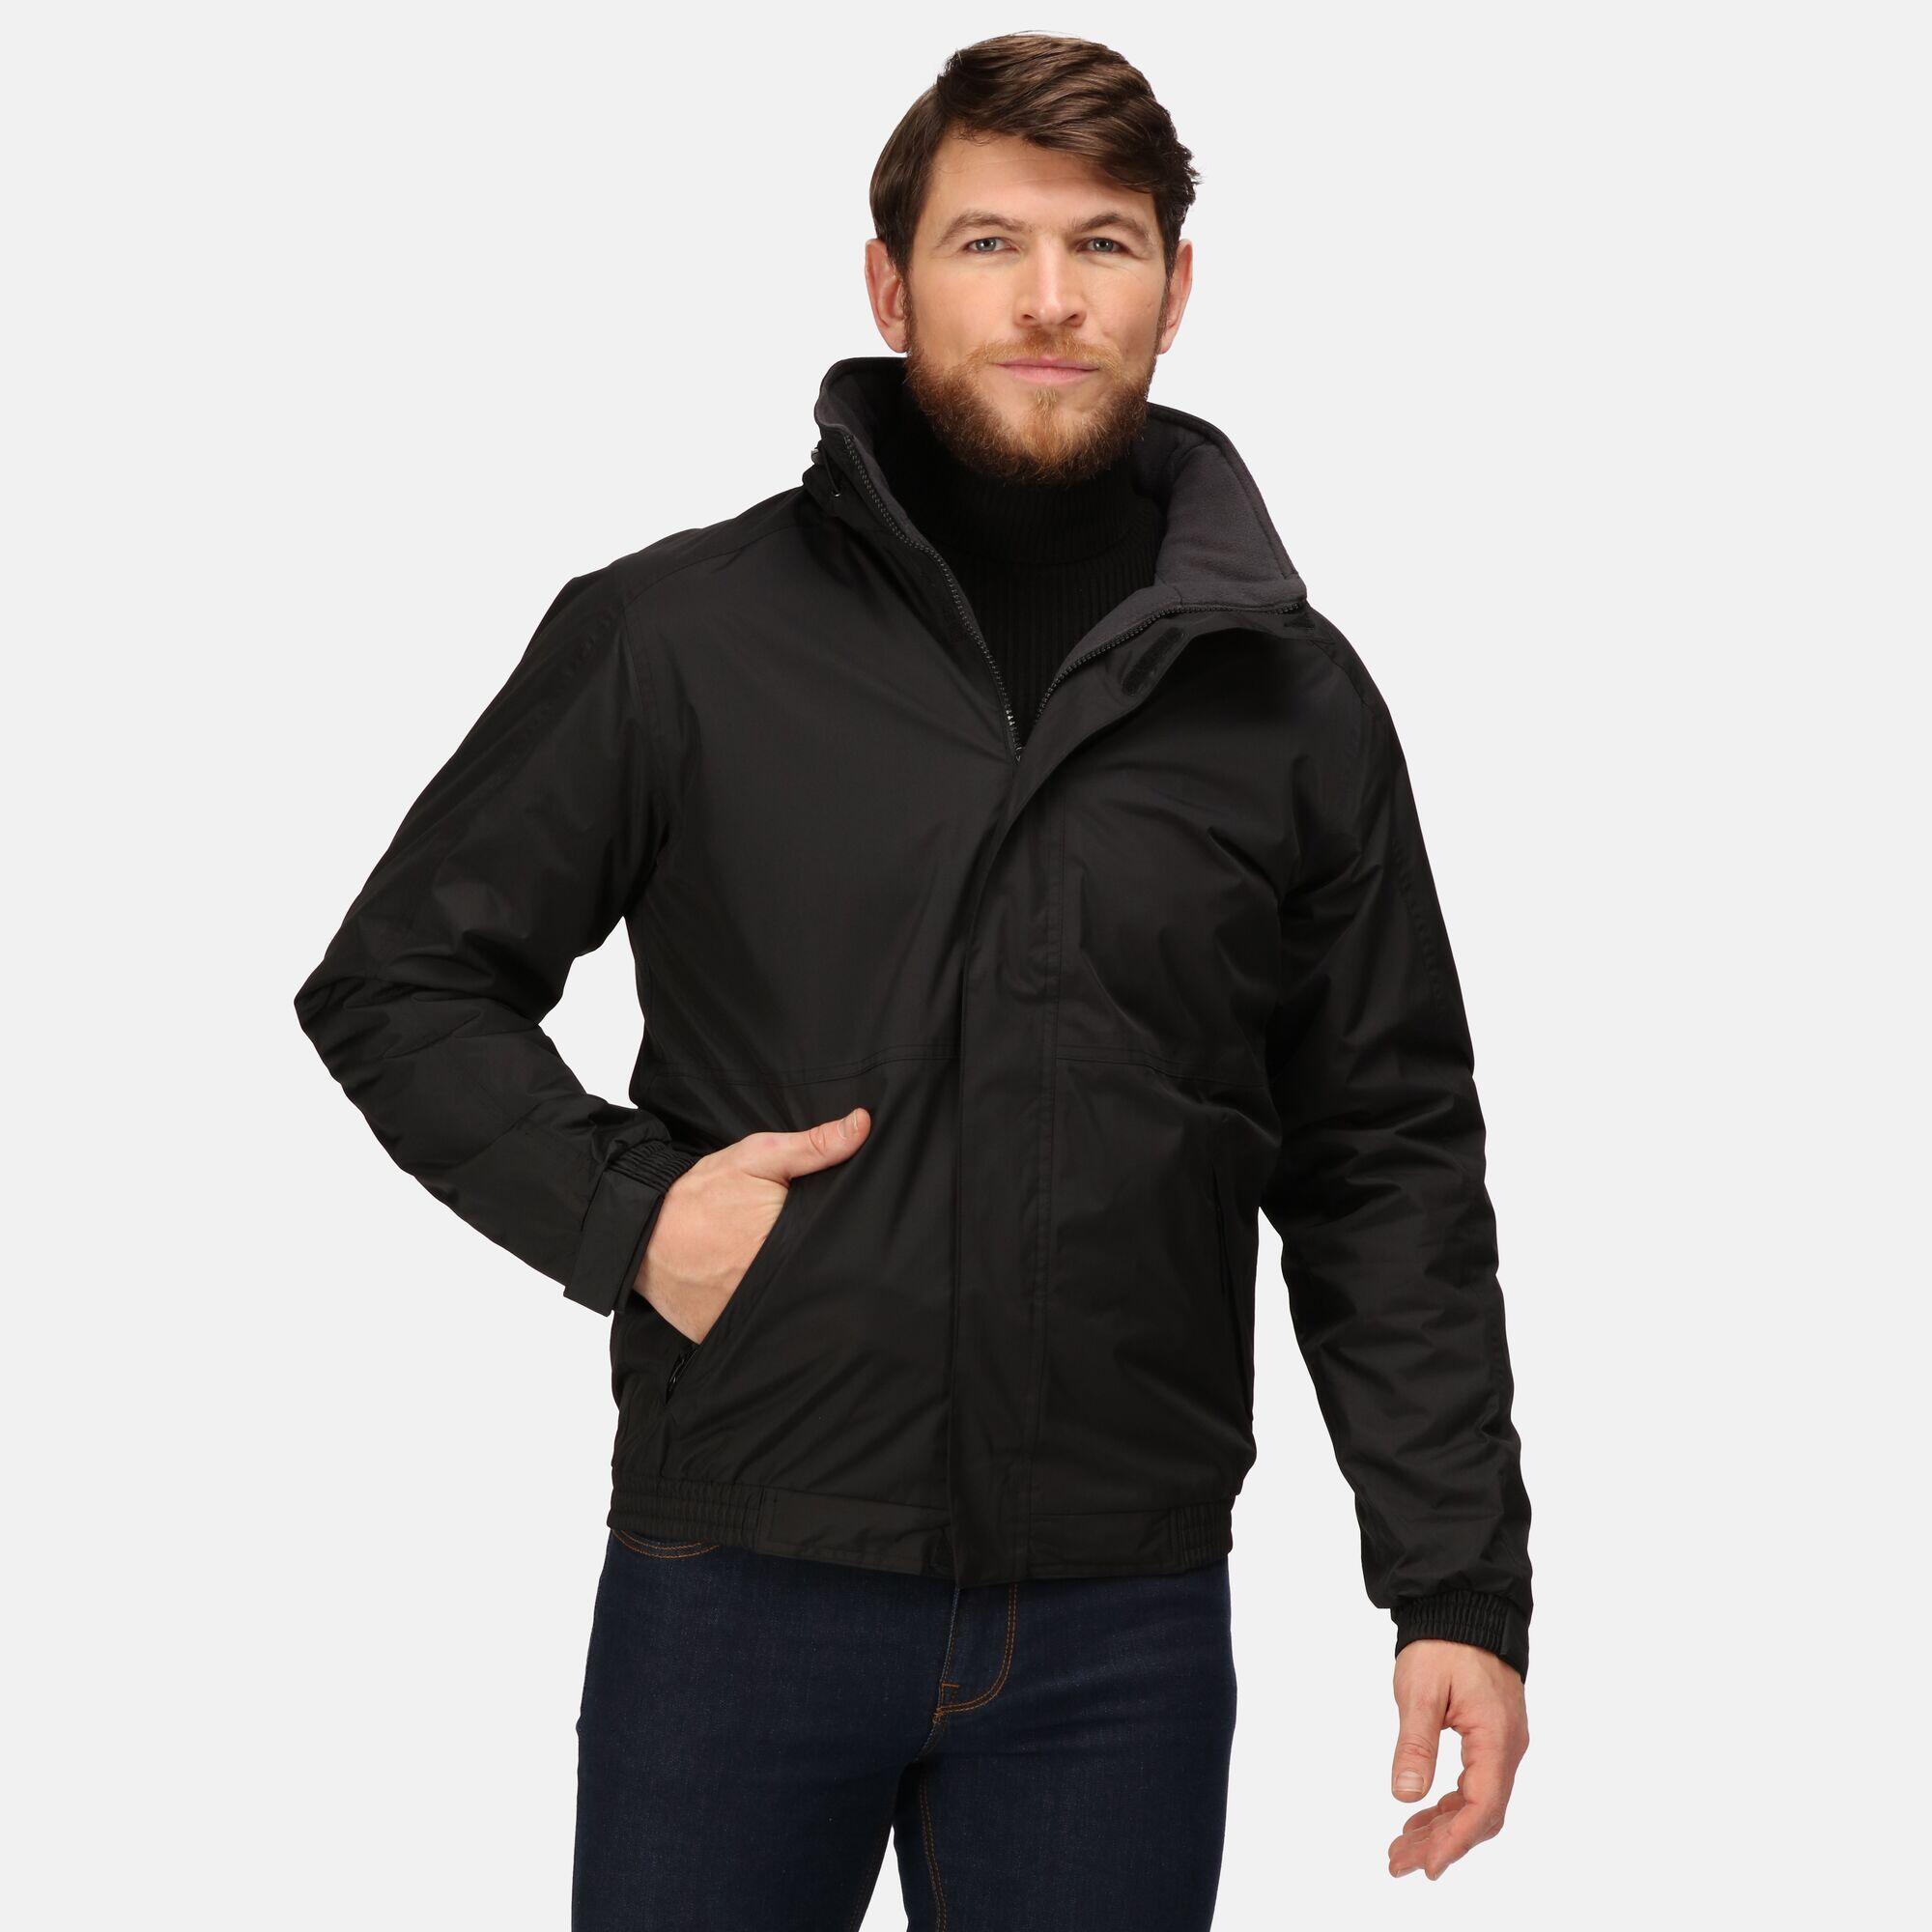 Dover Waterproof Windproof Jacket (ThermoGuard Insulation) (Black/Ash) 4/5